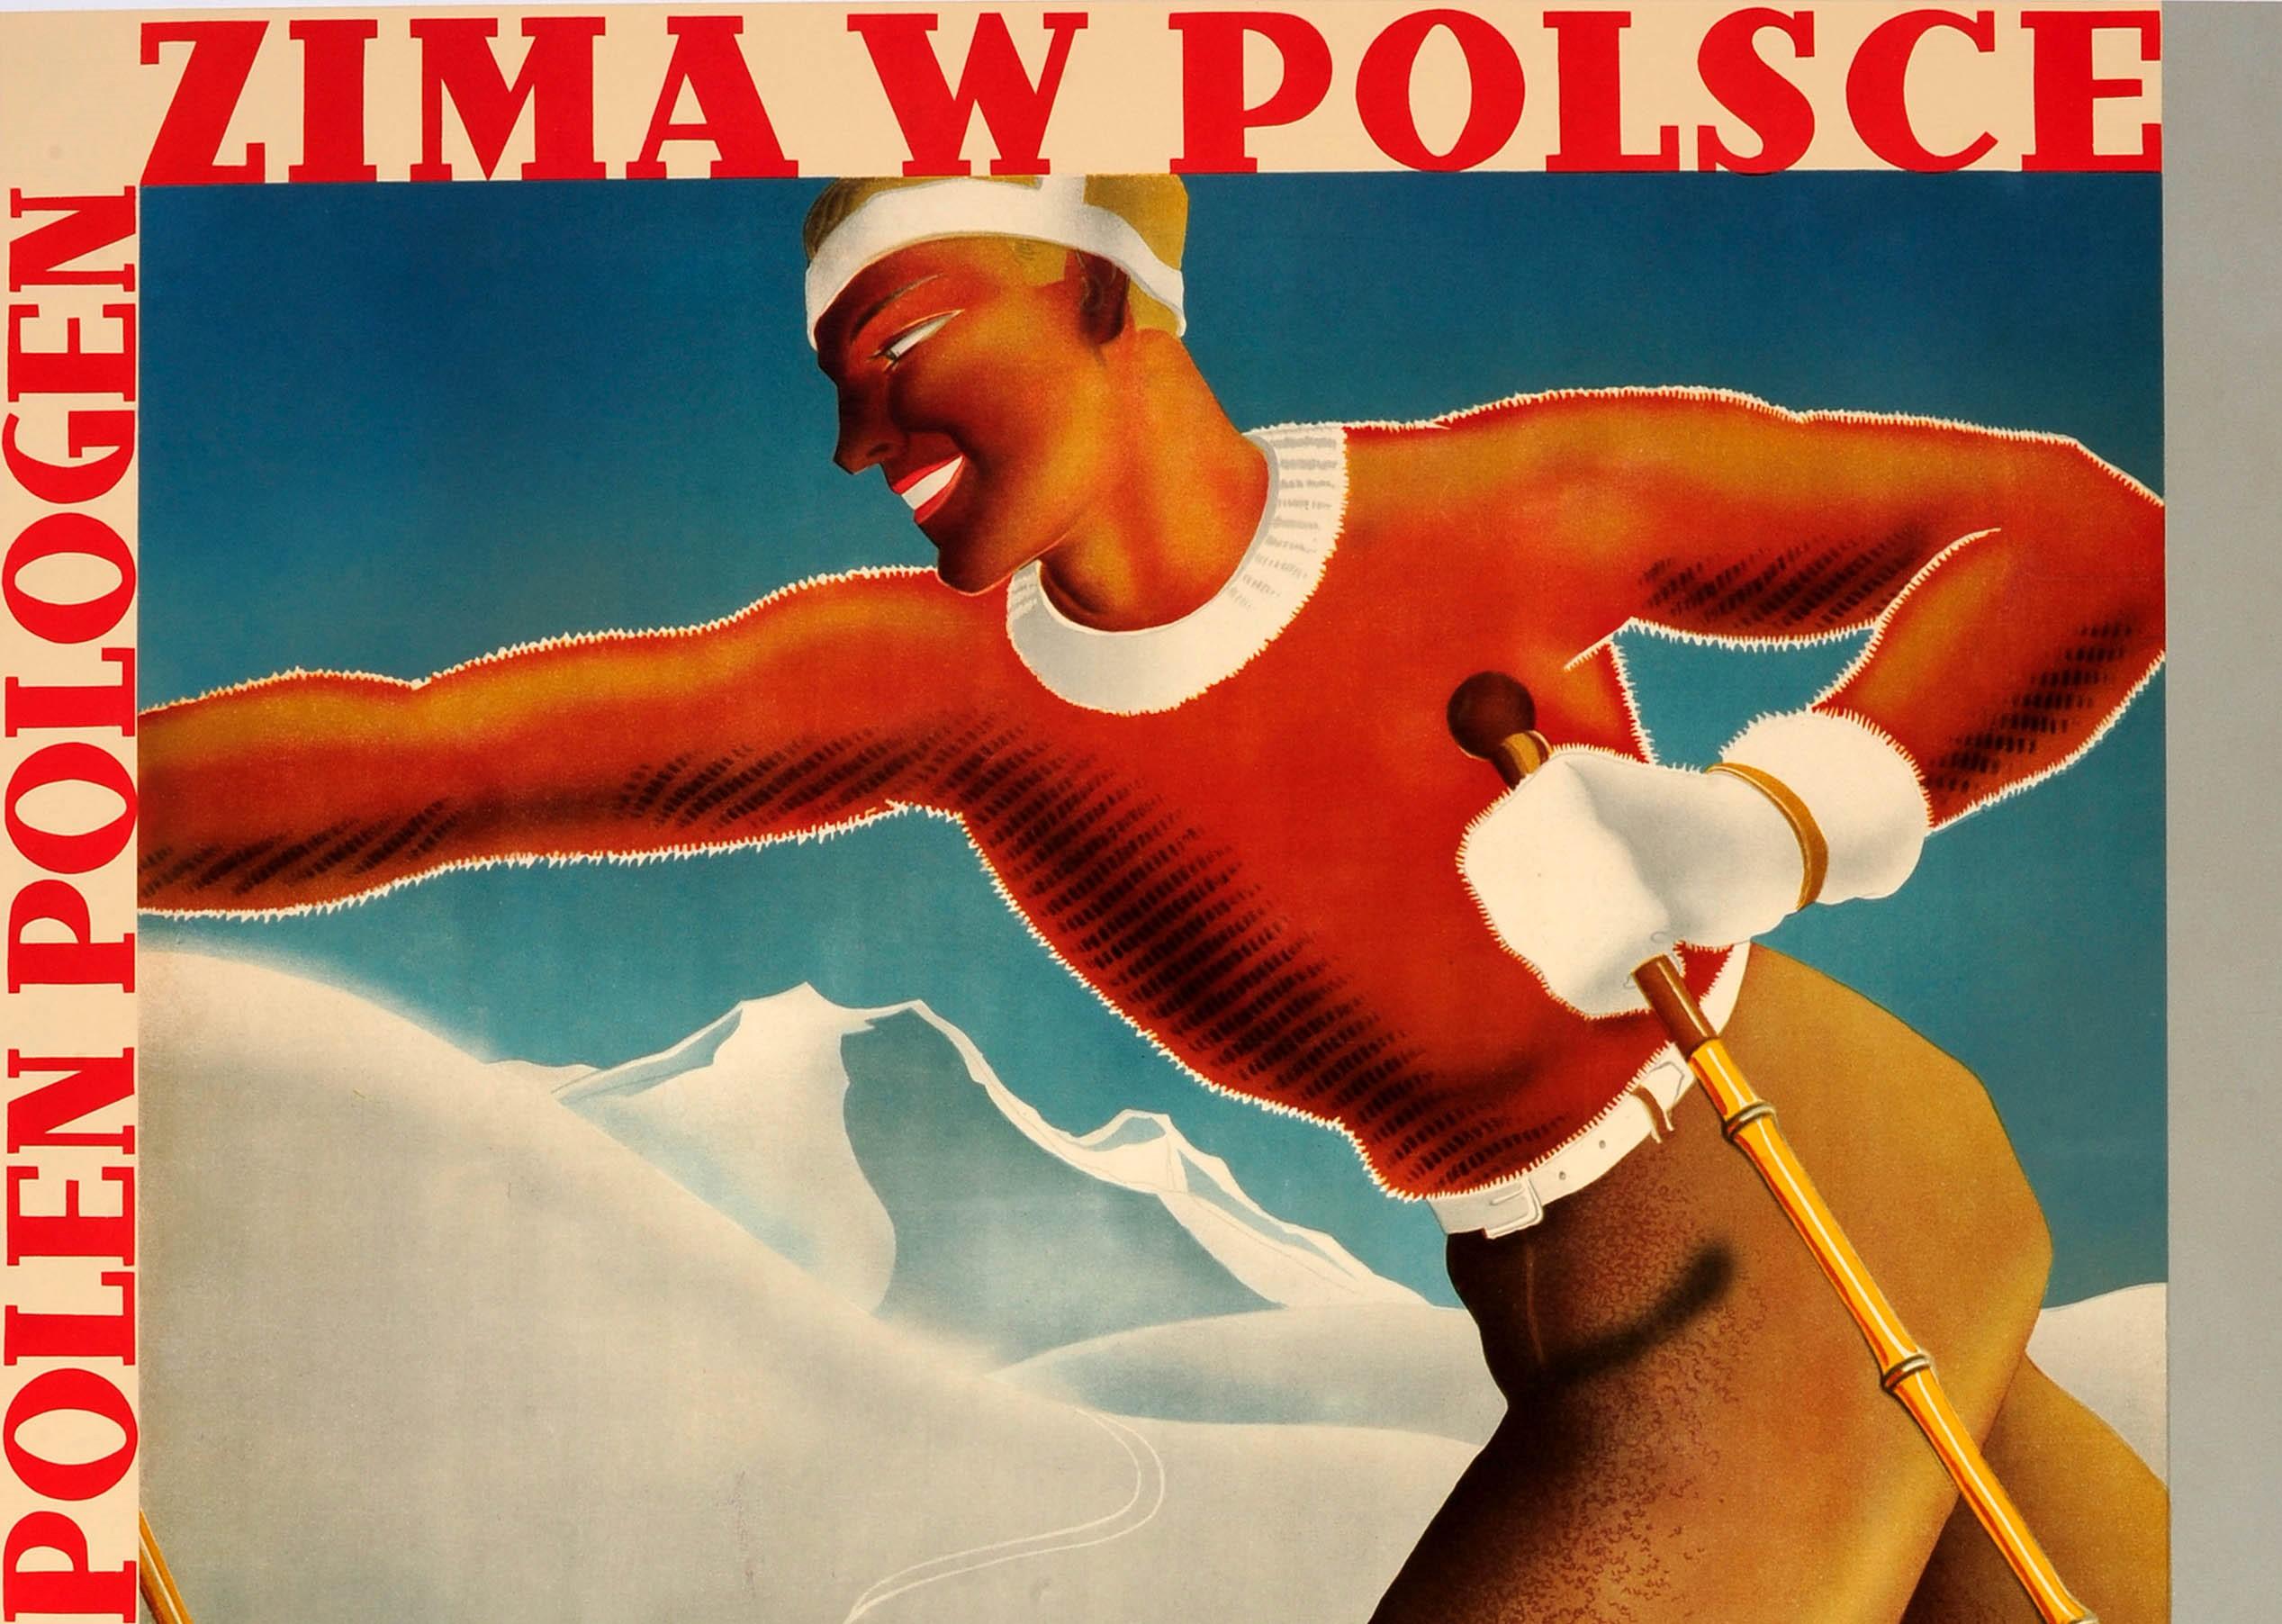 Original vintage ski poster promoting Winter in Poland / Zima w Polsce featuring a dynamic Art Deco style illustration of a skier on wooden skis and ski poles on a snowy mountain in the foreground with a snow covered wooden house and mountain peaks